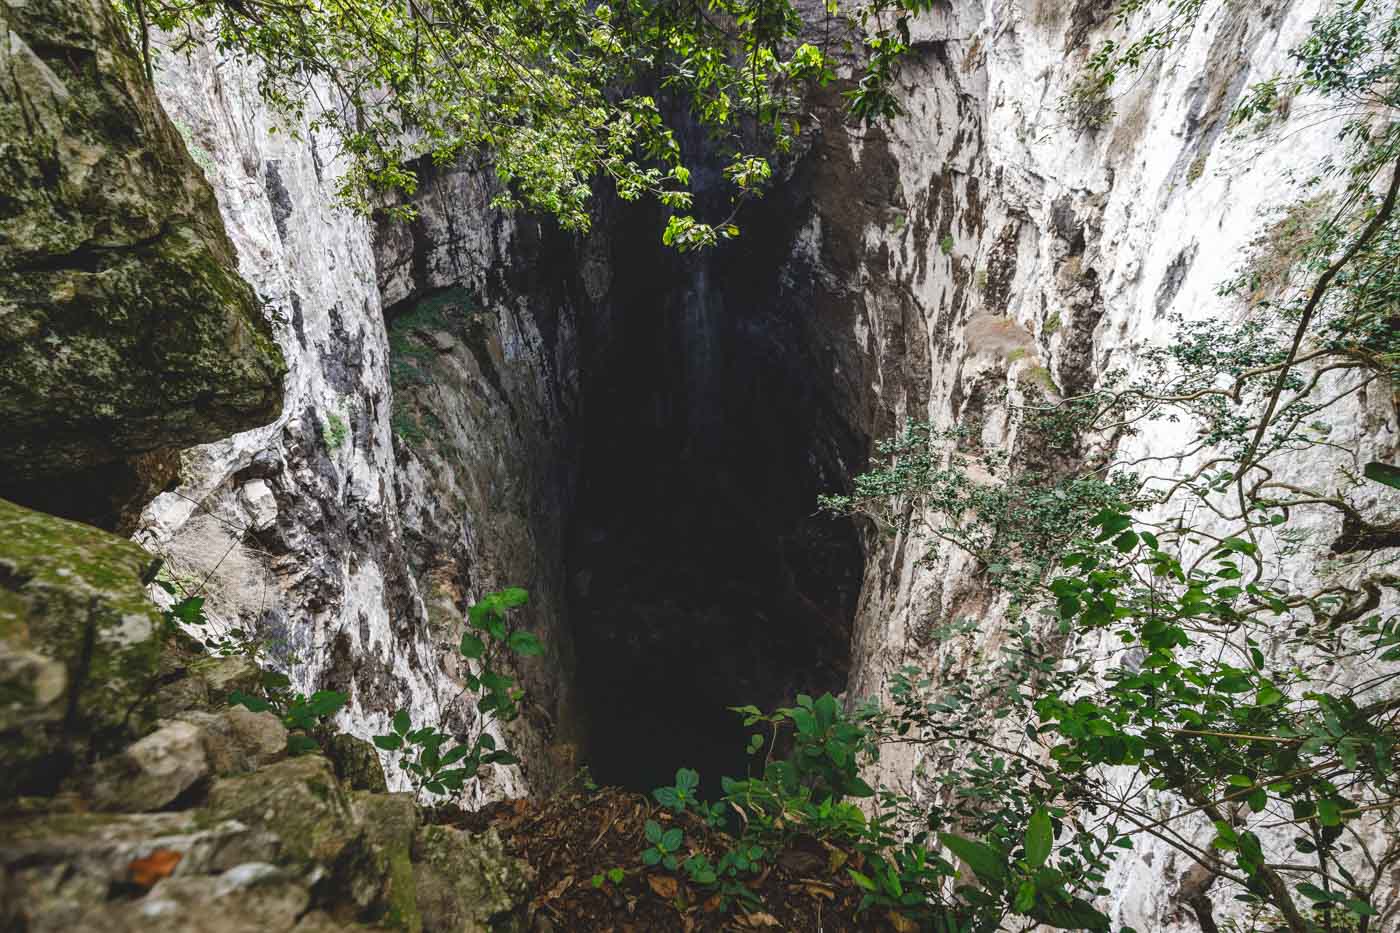 Looking over a cliff edge into the large and empty Huahua Cave.